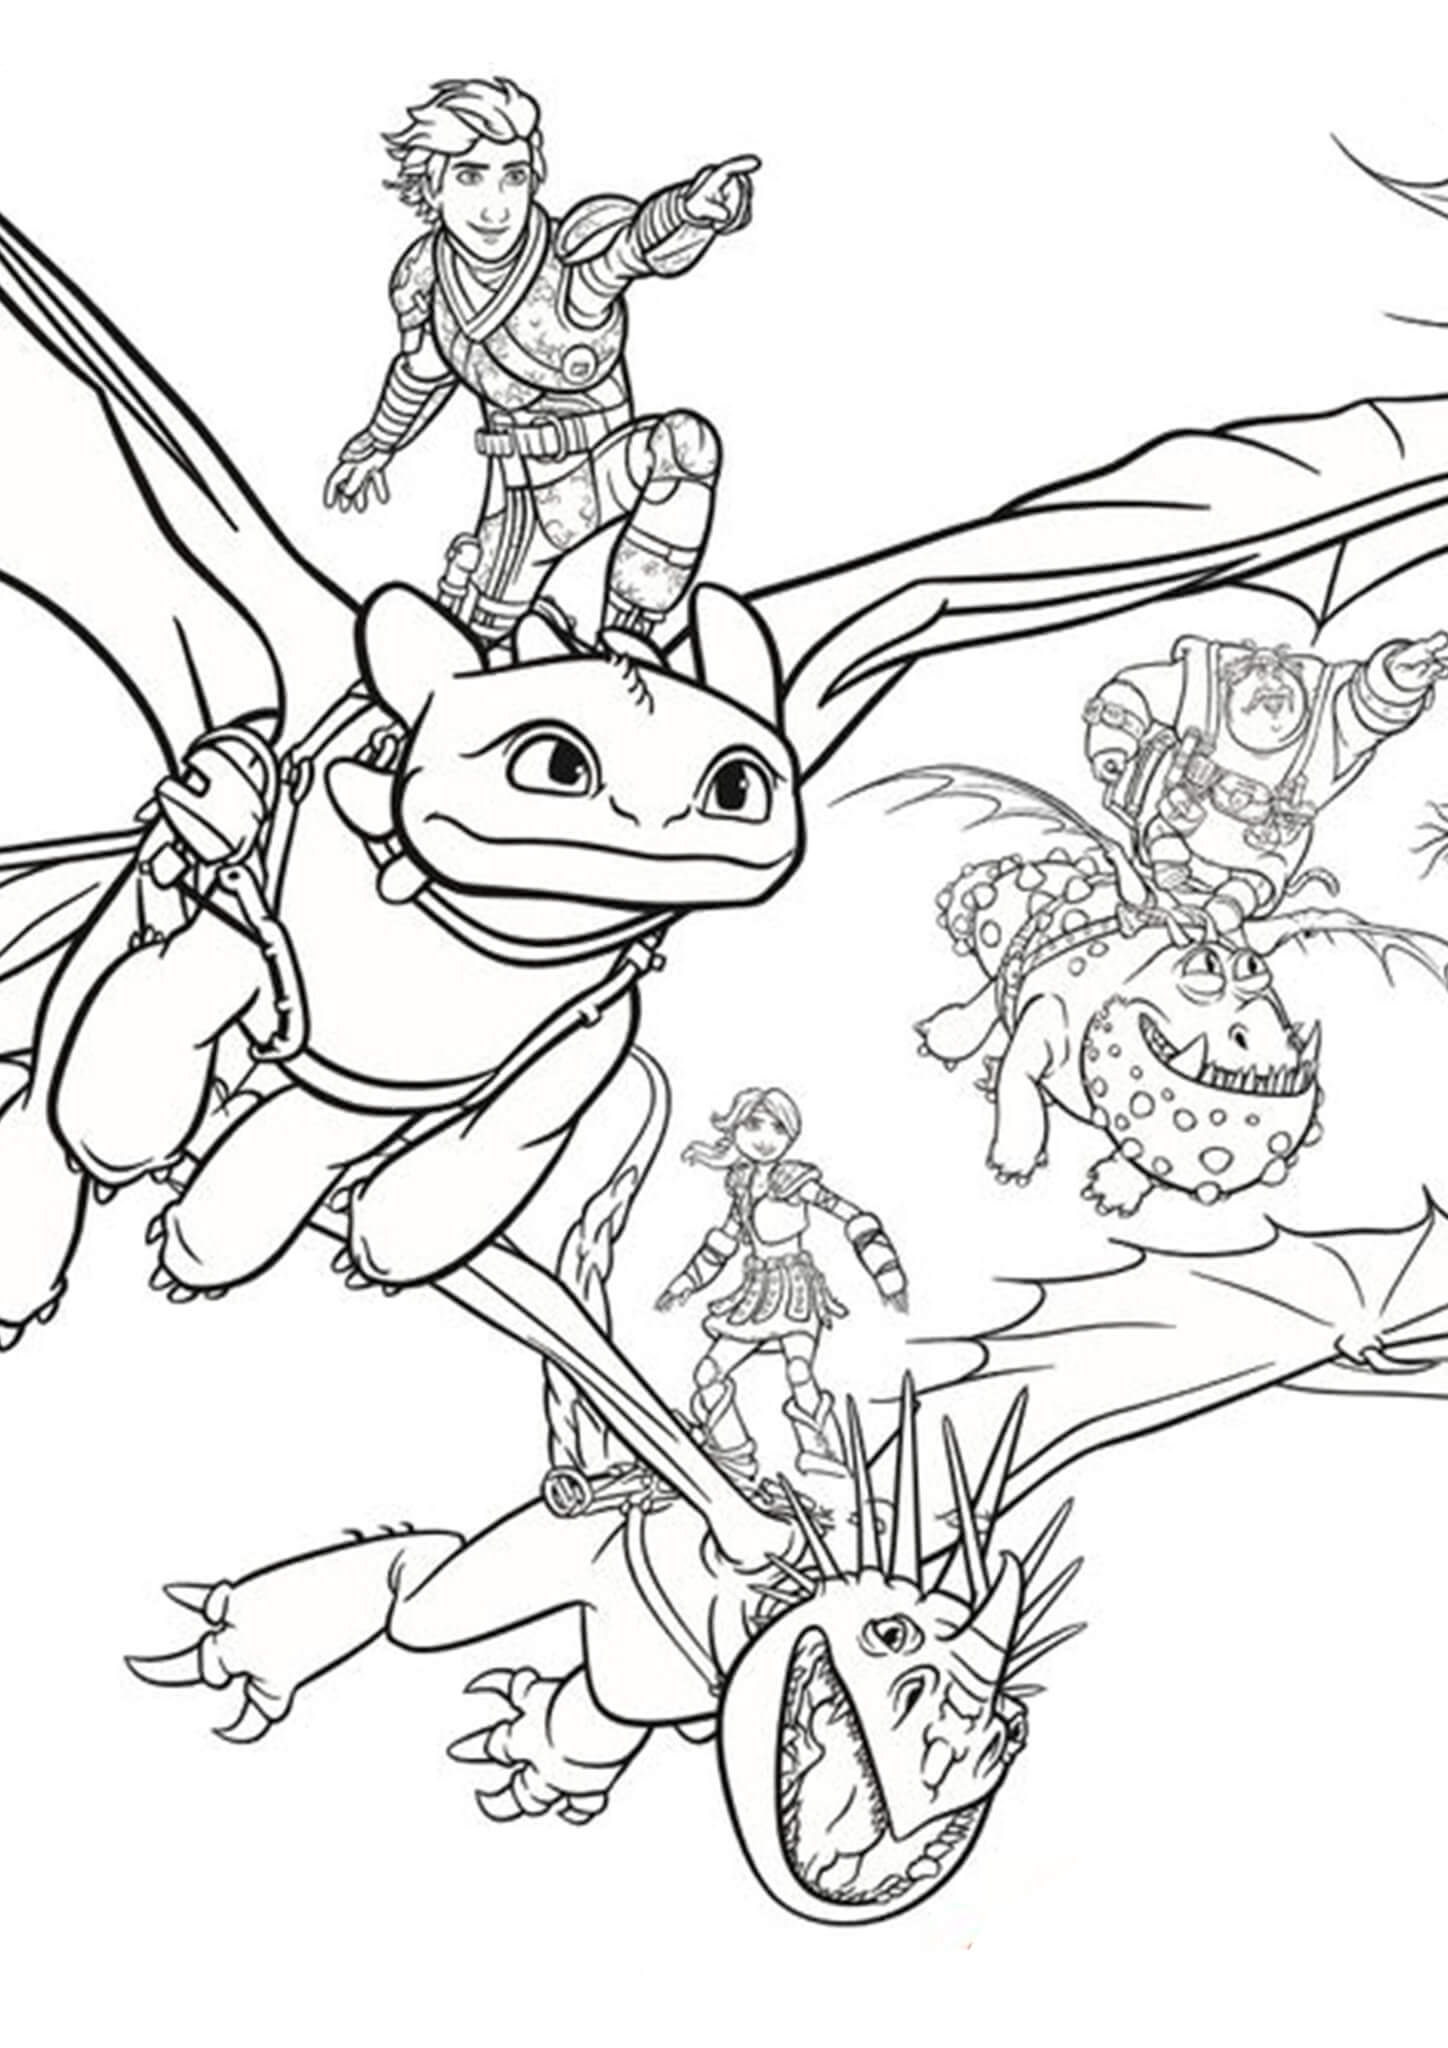 How To Train Your Dragon Coloring Sheets Printable